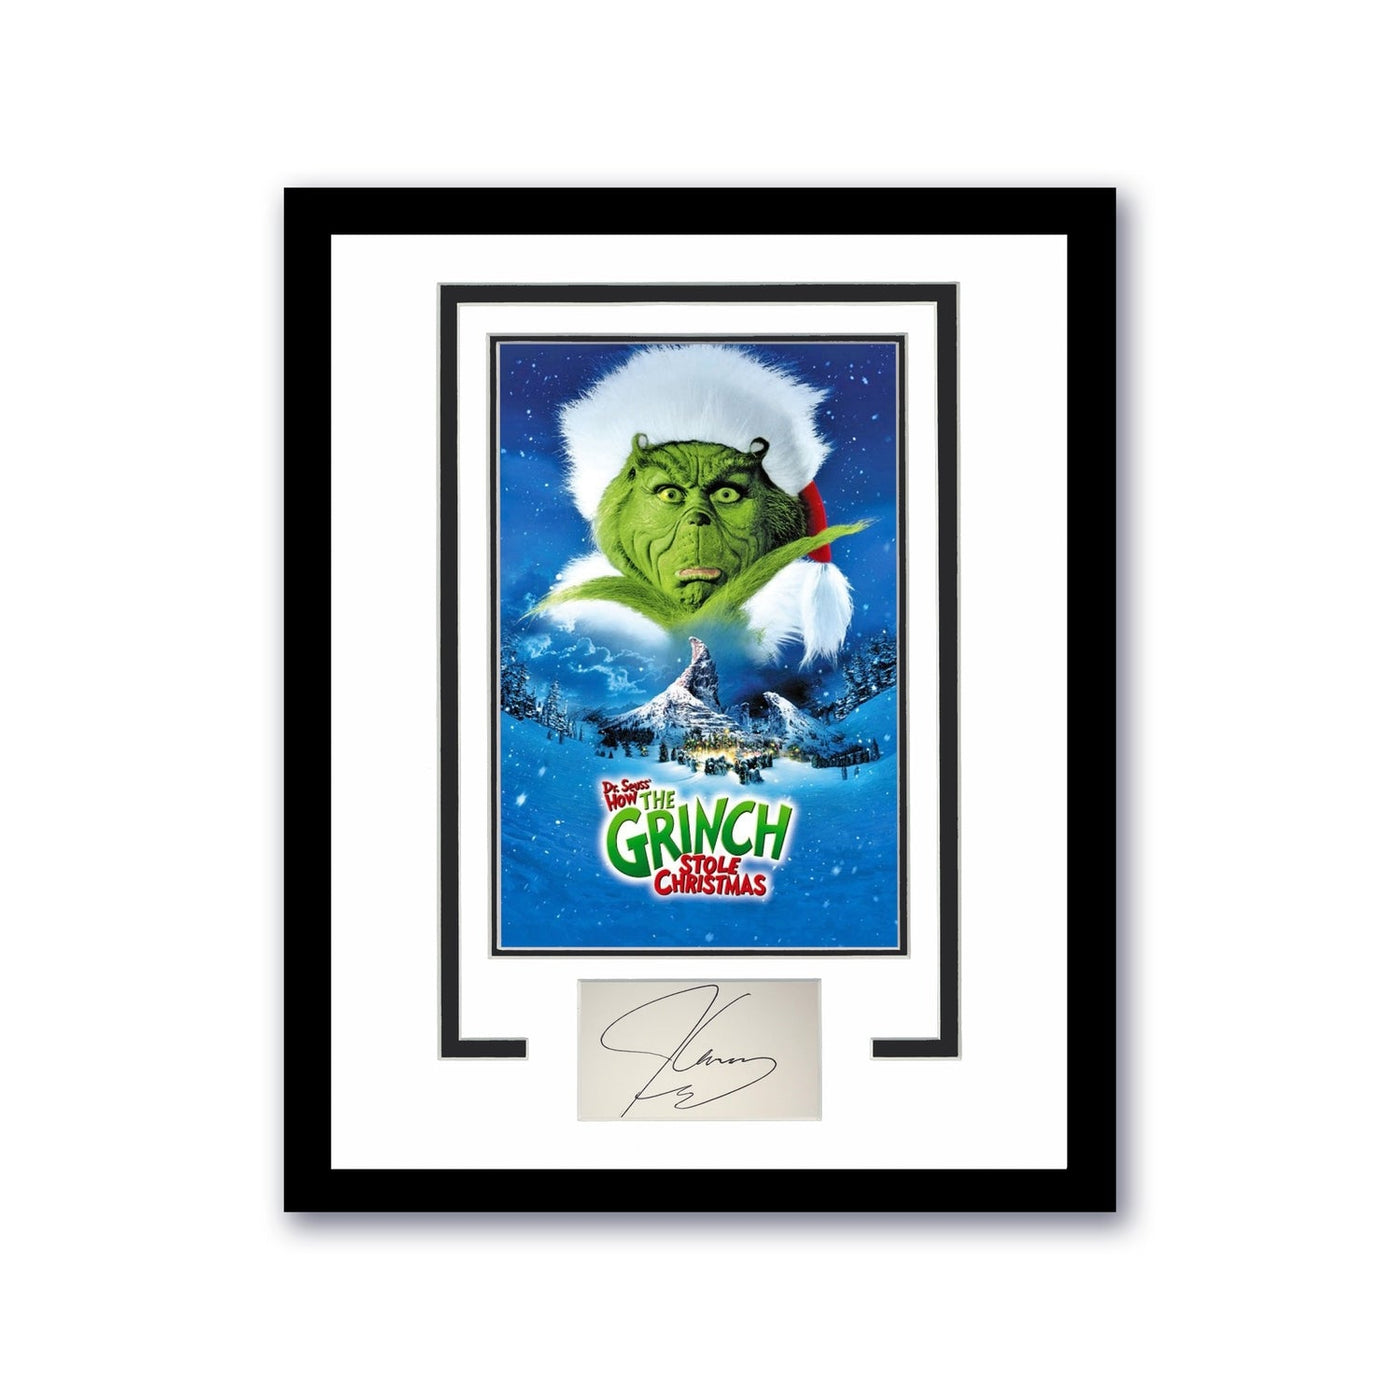 The Grinch Jim Carrey Autographed Signed 11x14 Framed Photo Christmas ACOA 2